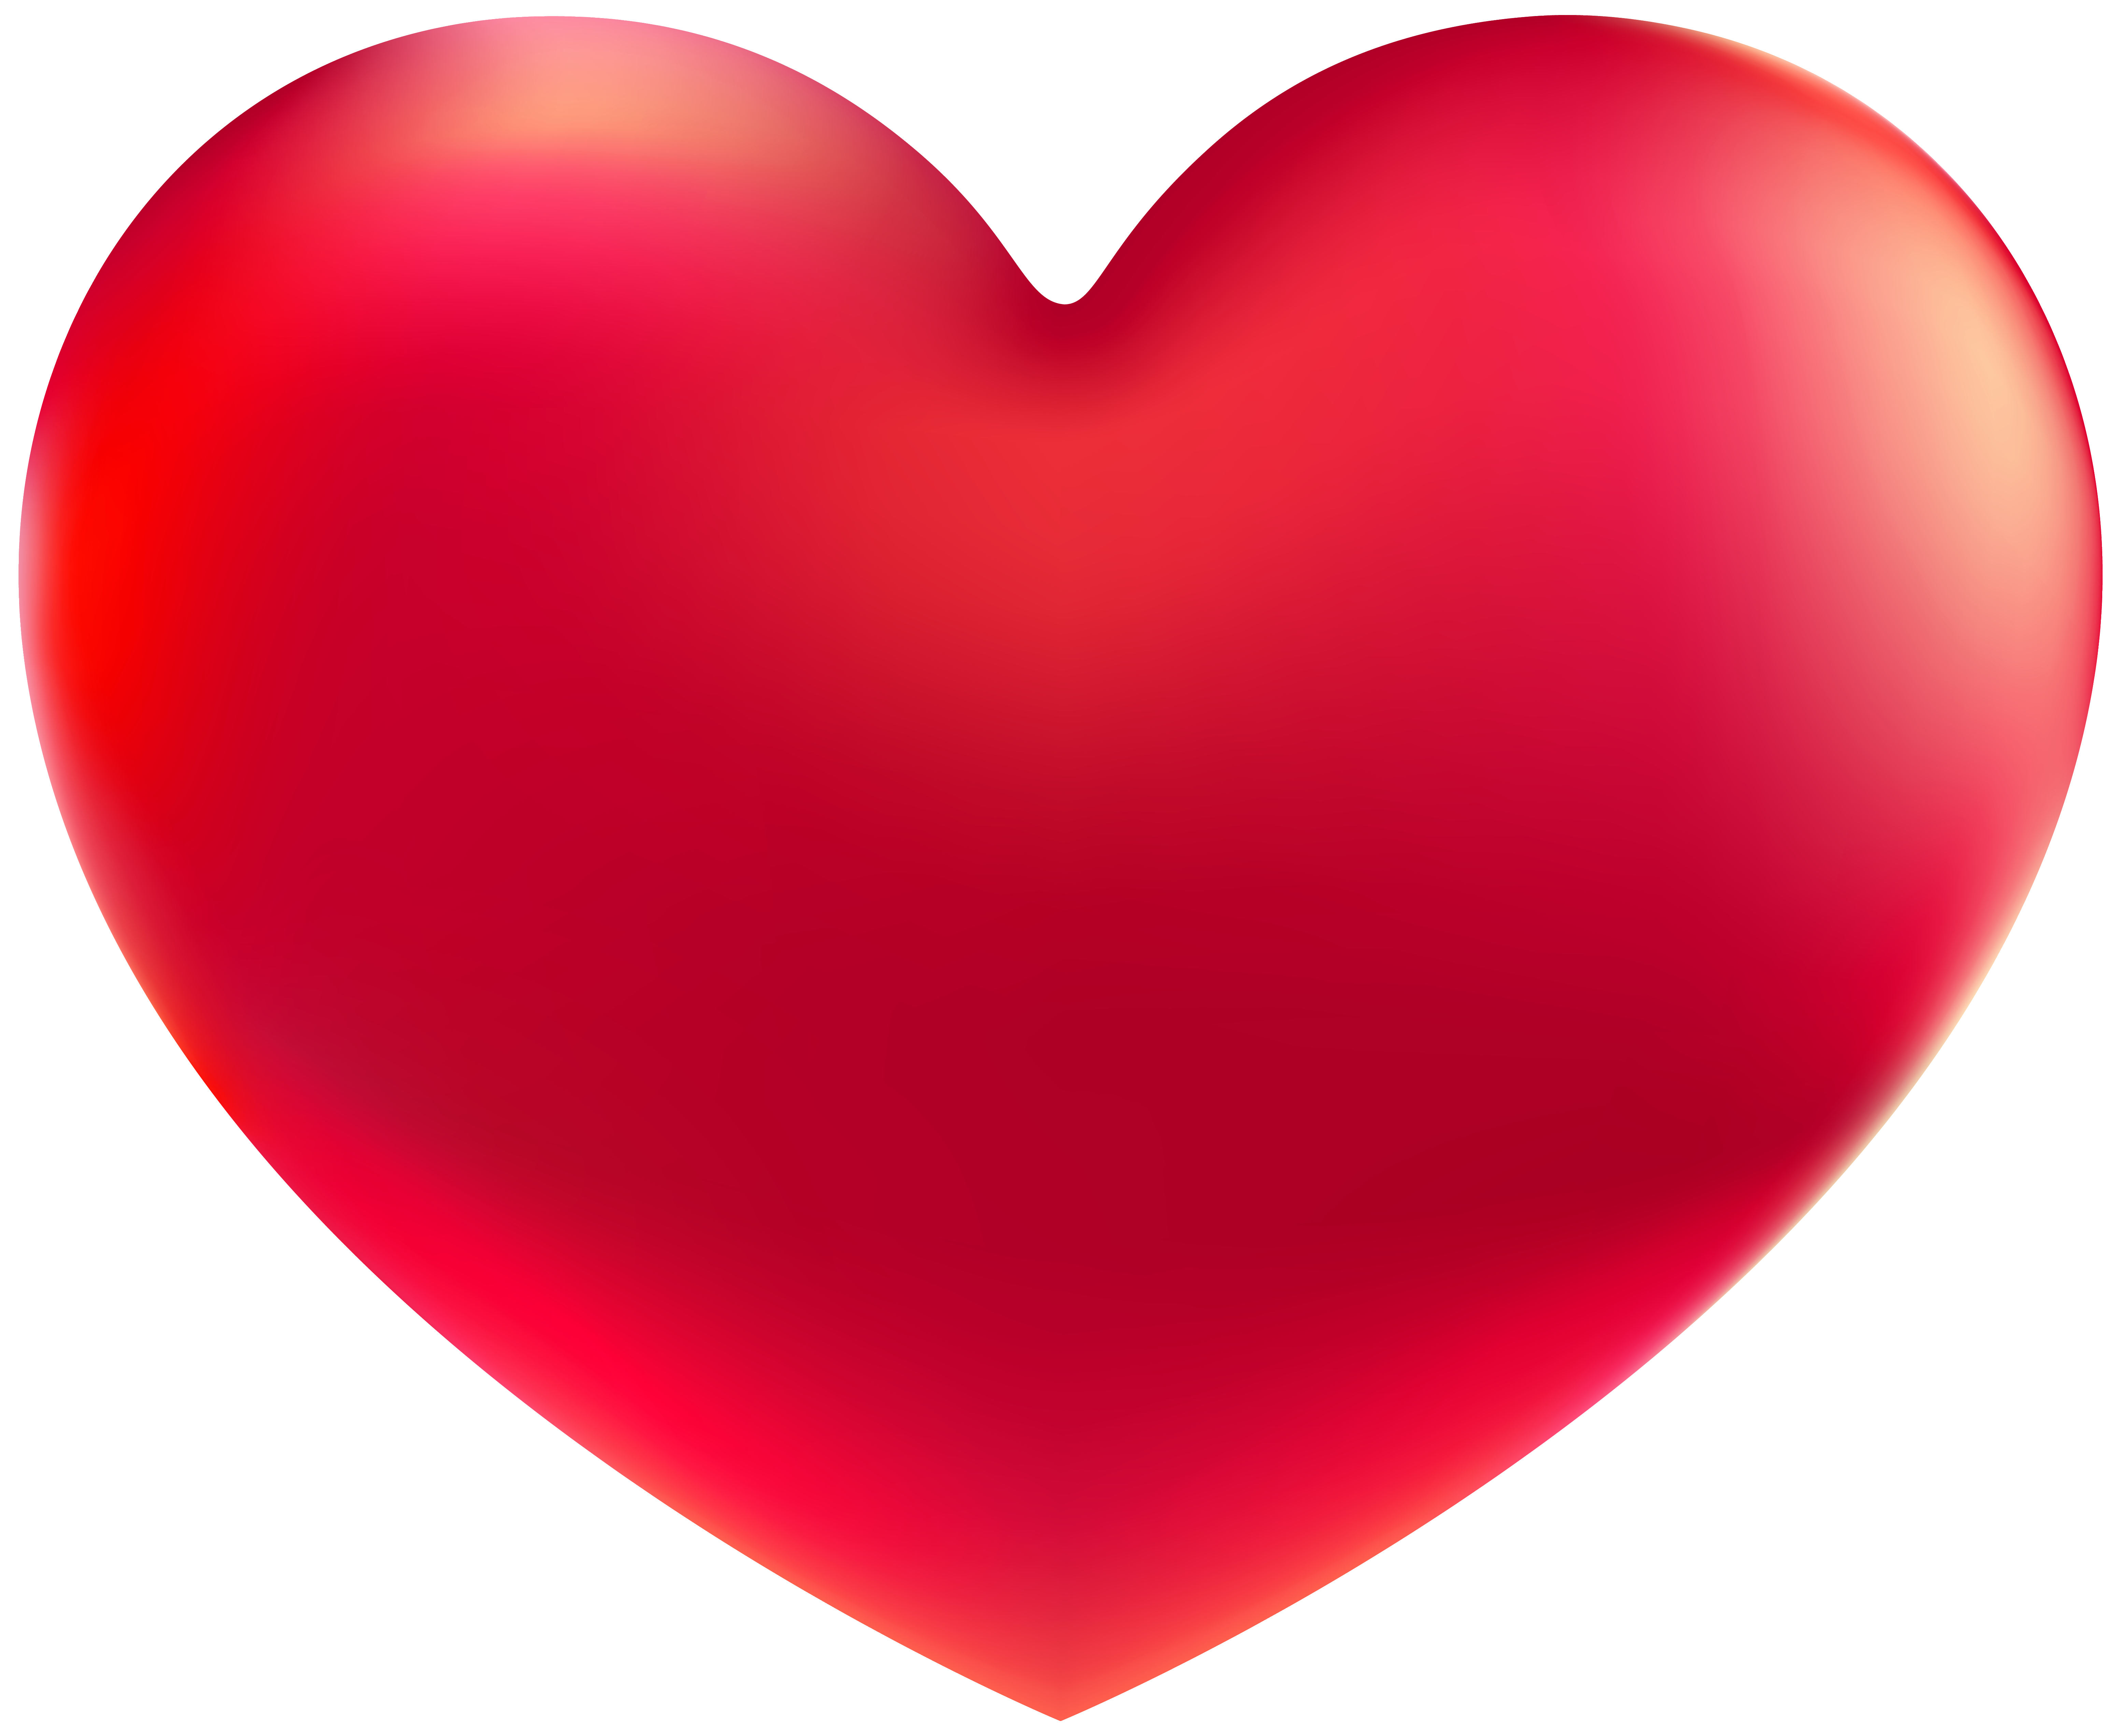  Heart Clipart Red Picture 1319910 heart Clipart Red